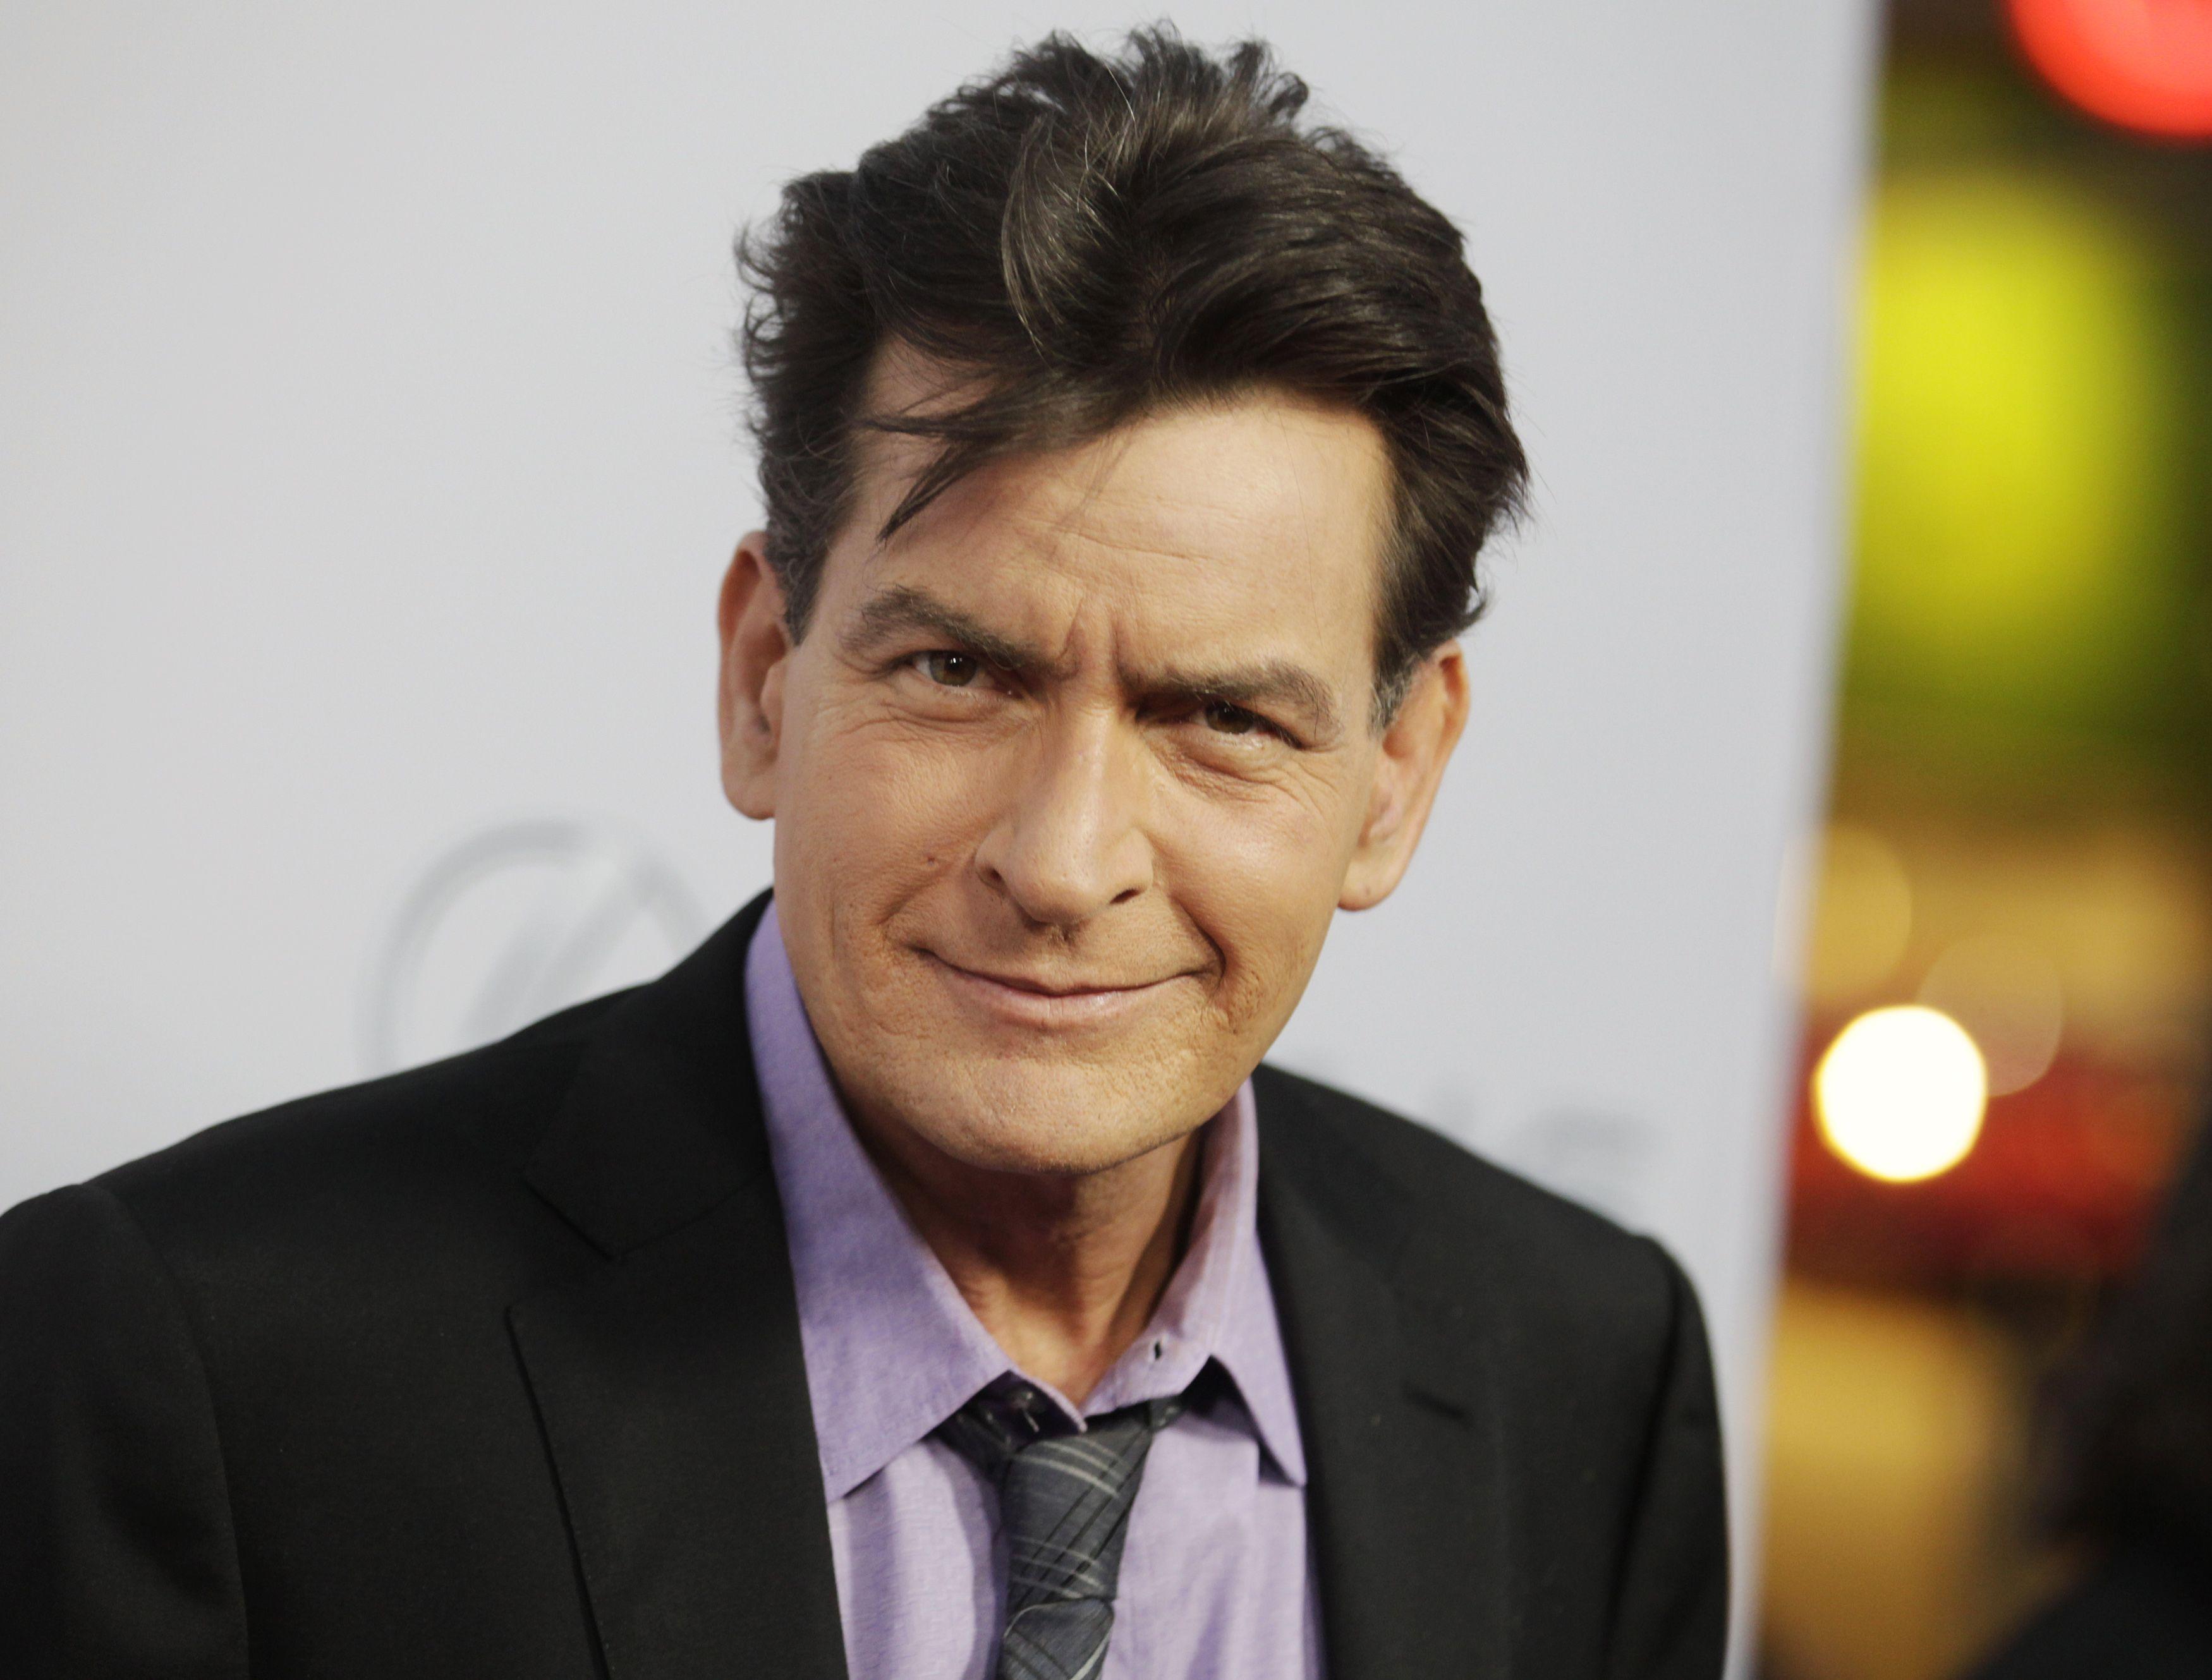 Wallpaper for Charlie Sheen ⇒ Resolution 3500x2659px